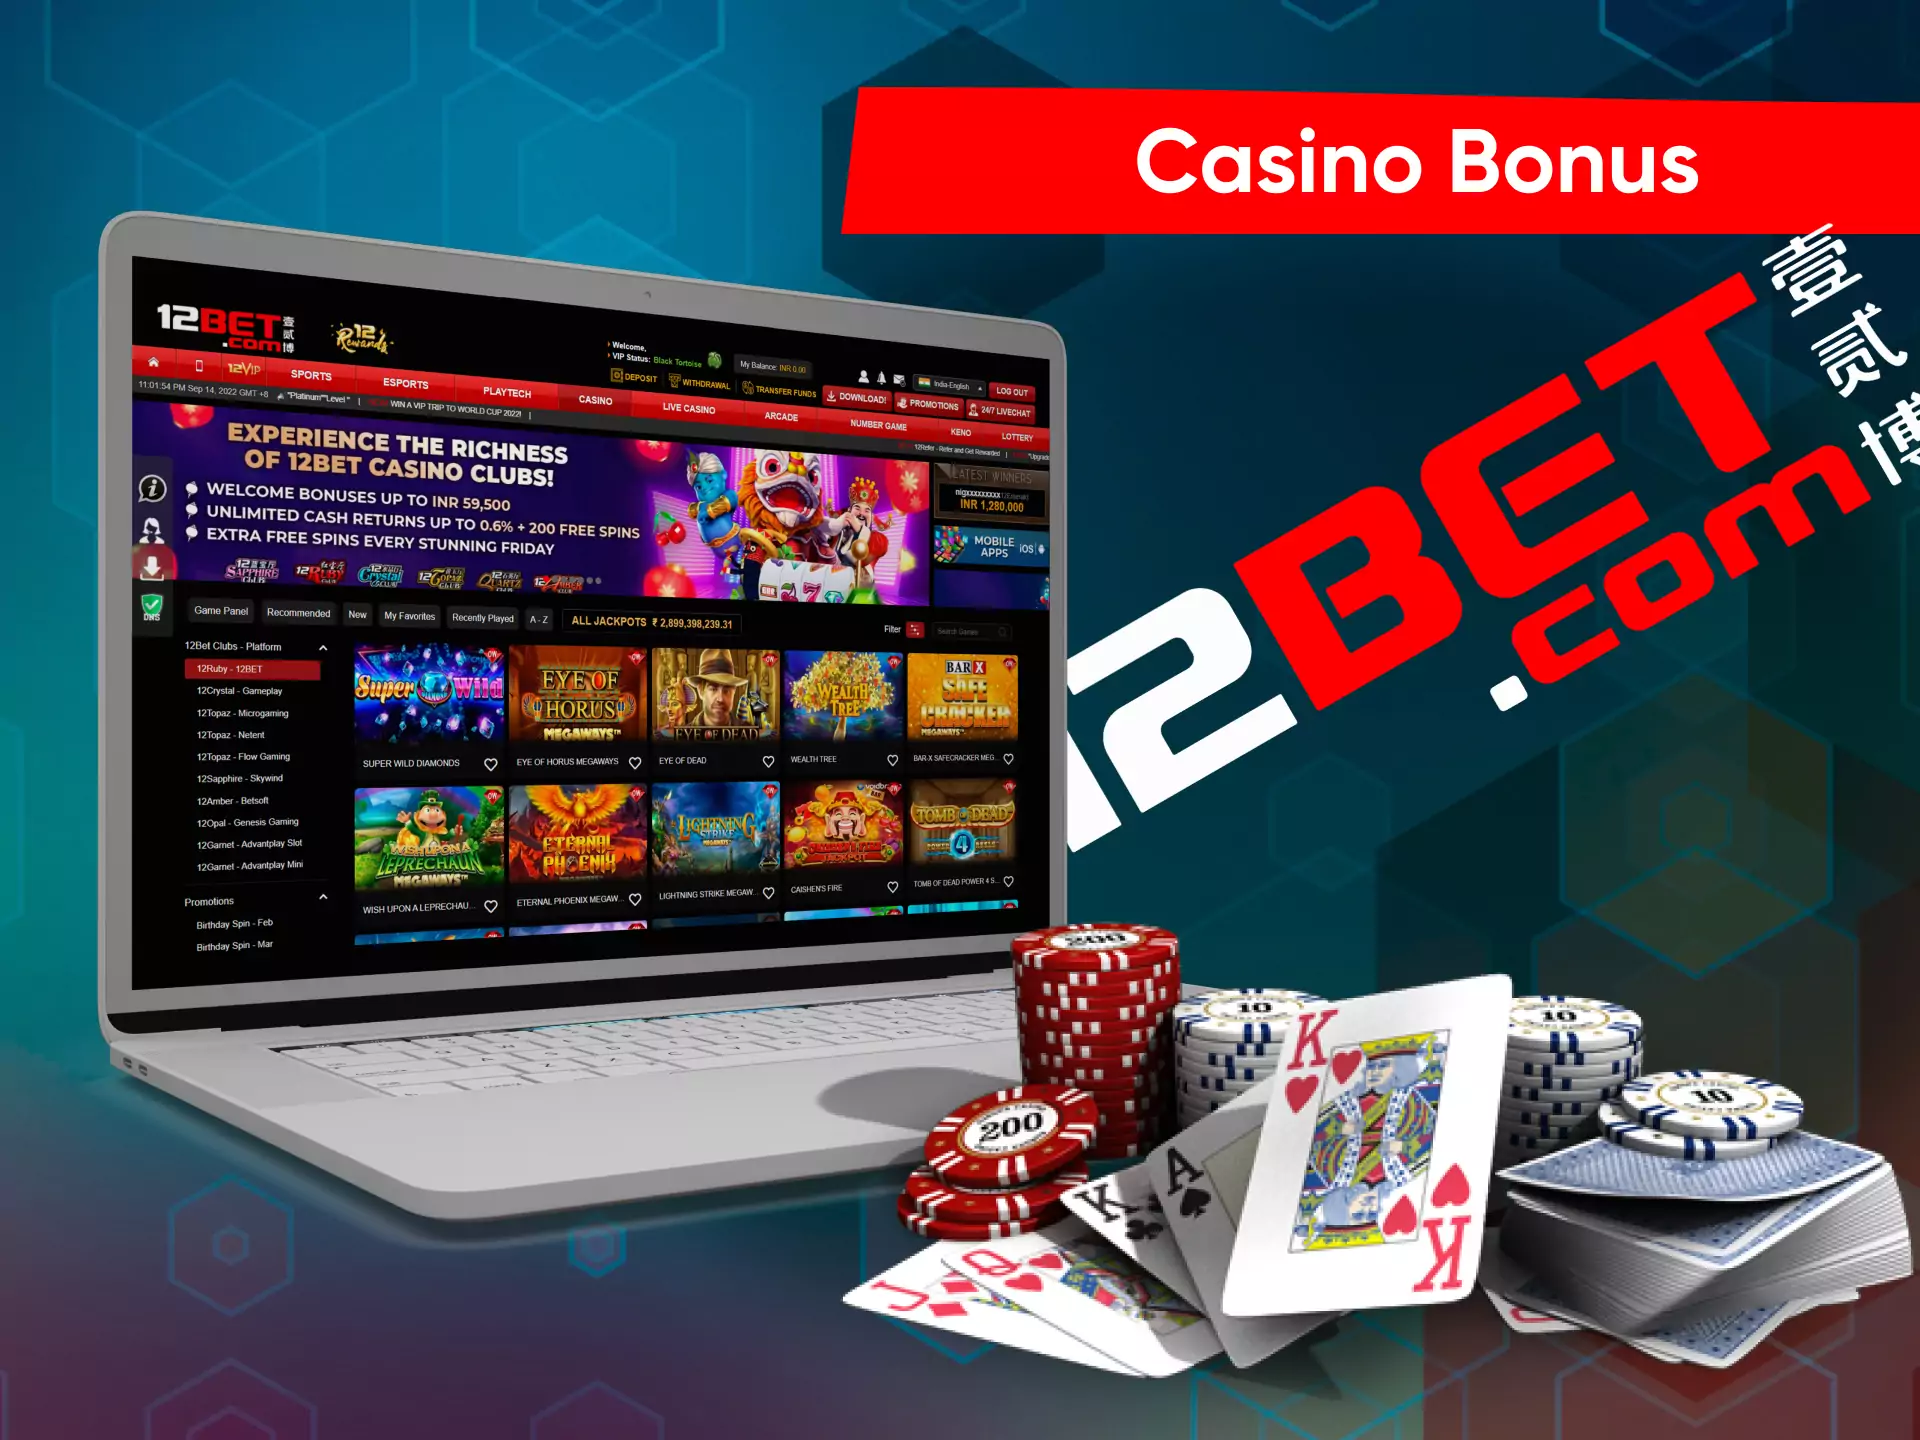 For casino fans, there is a special bonus offer from 12bet.